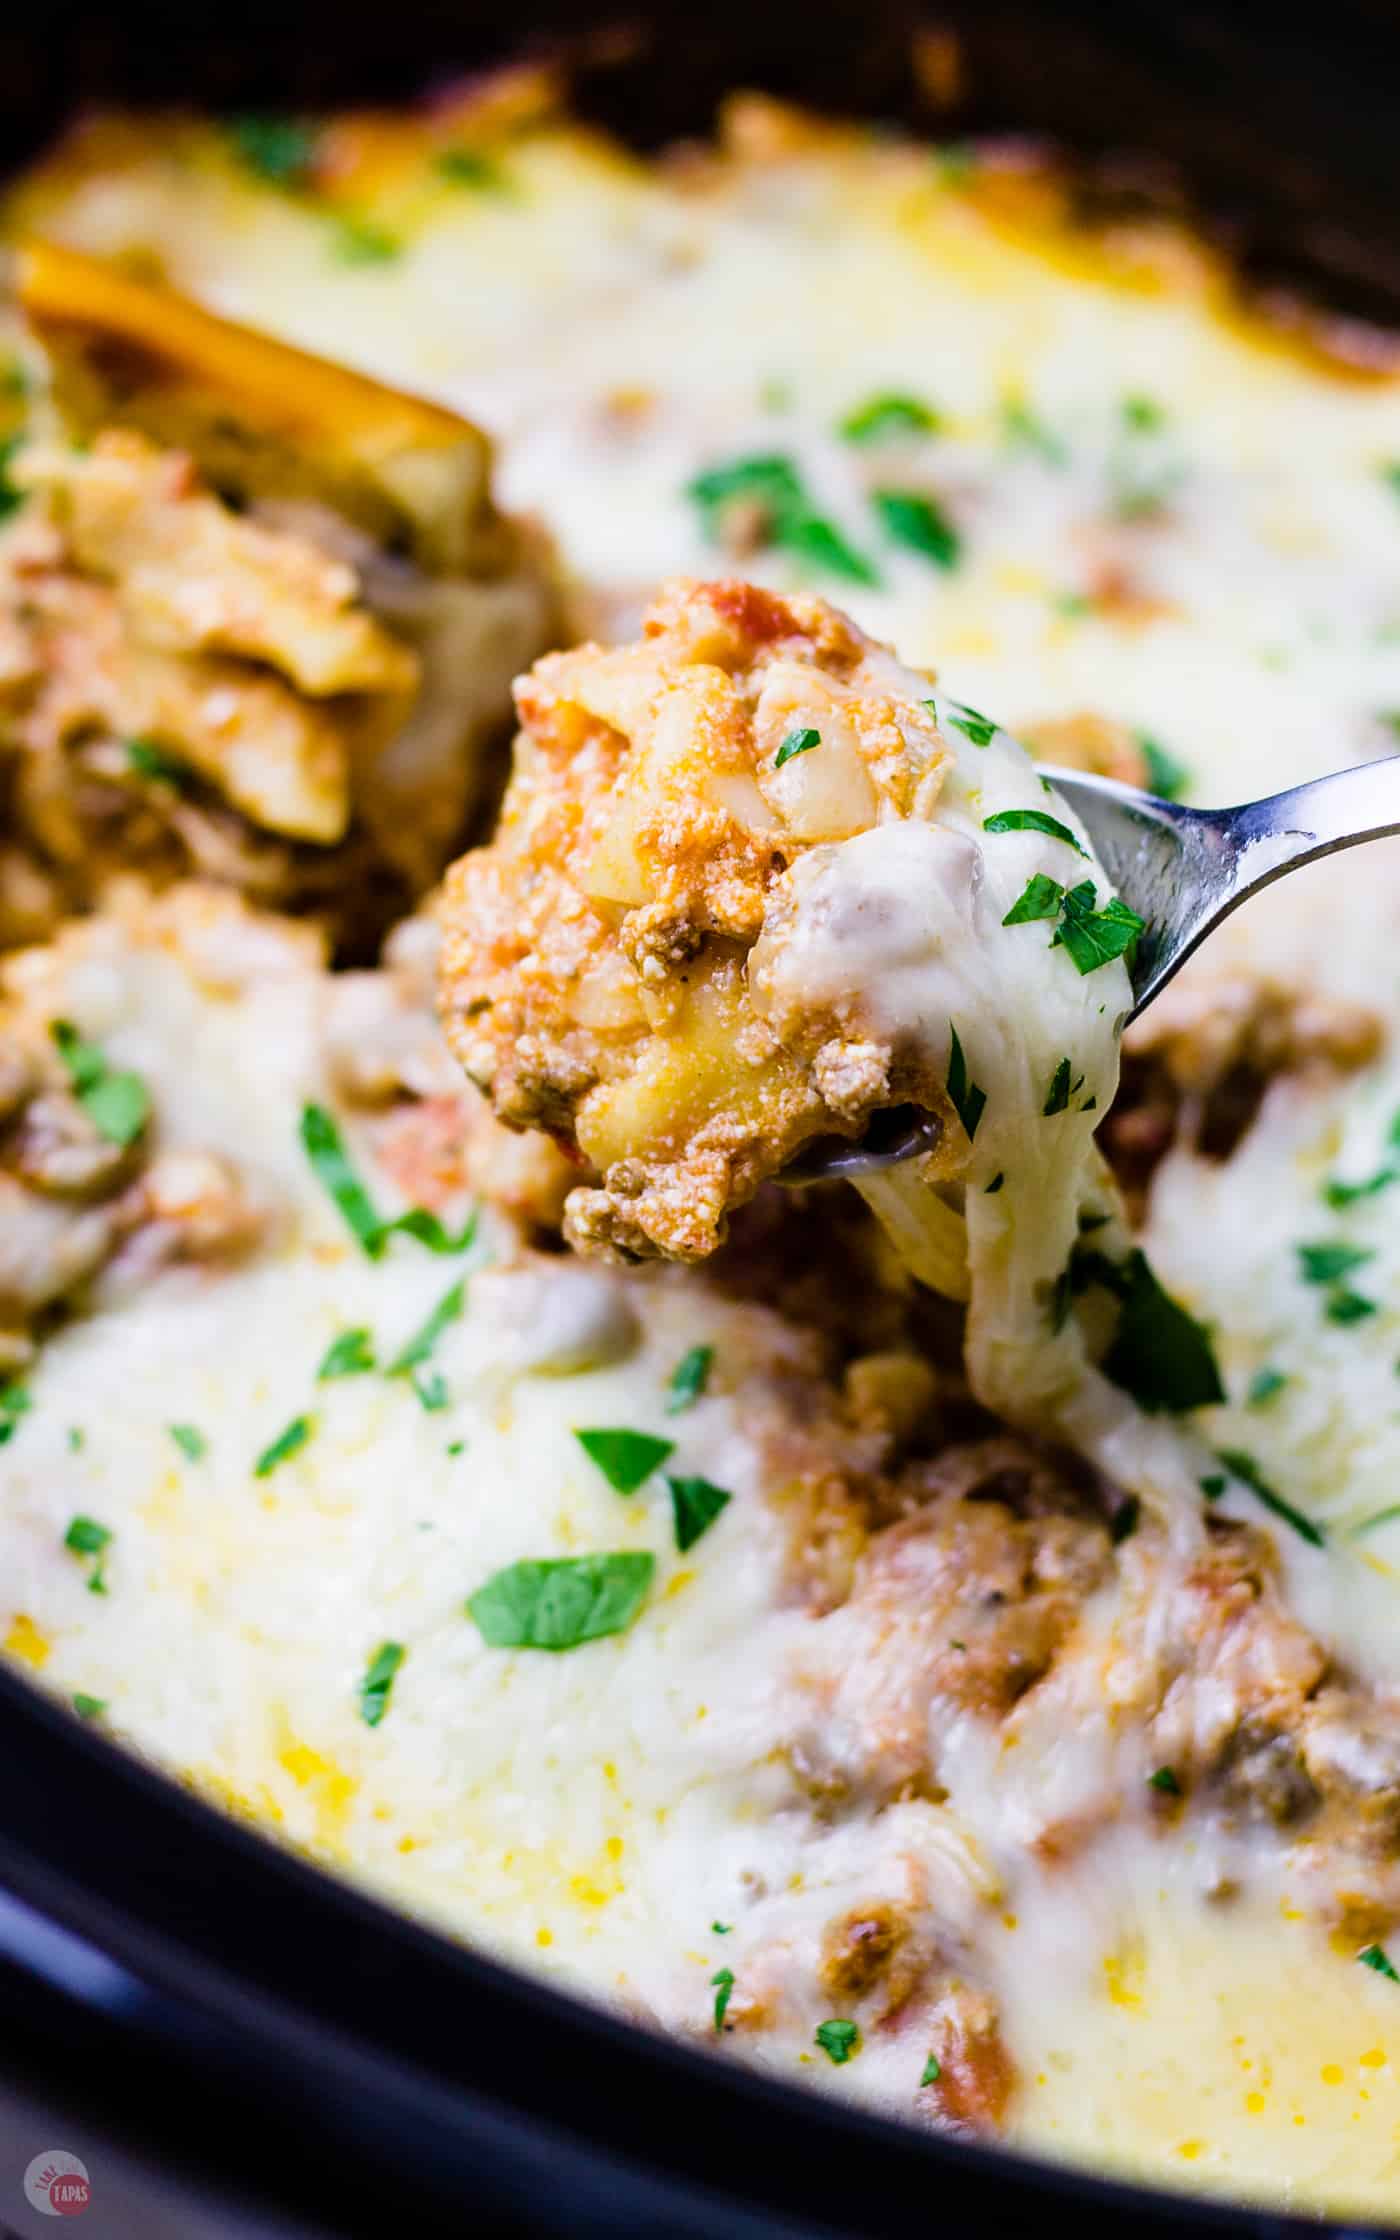 This crockpot lasagna dip wouldn't be complete without some pasta and extra cheese! 